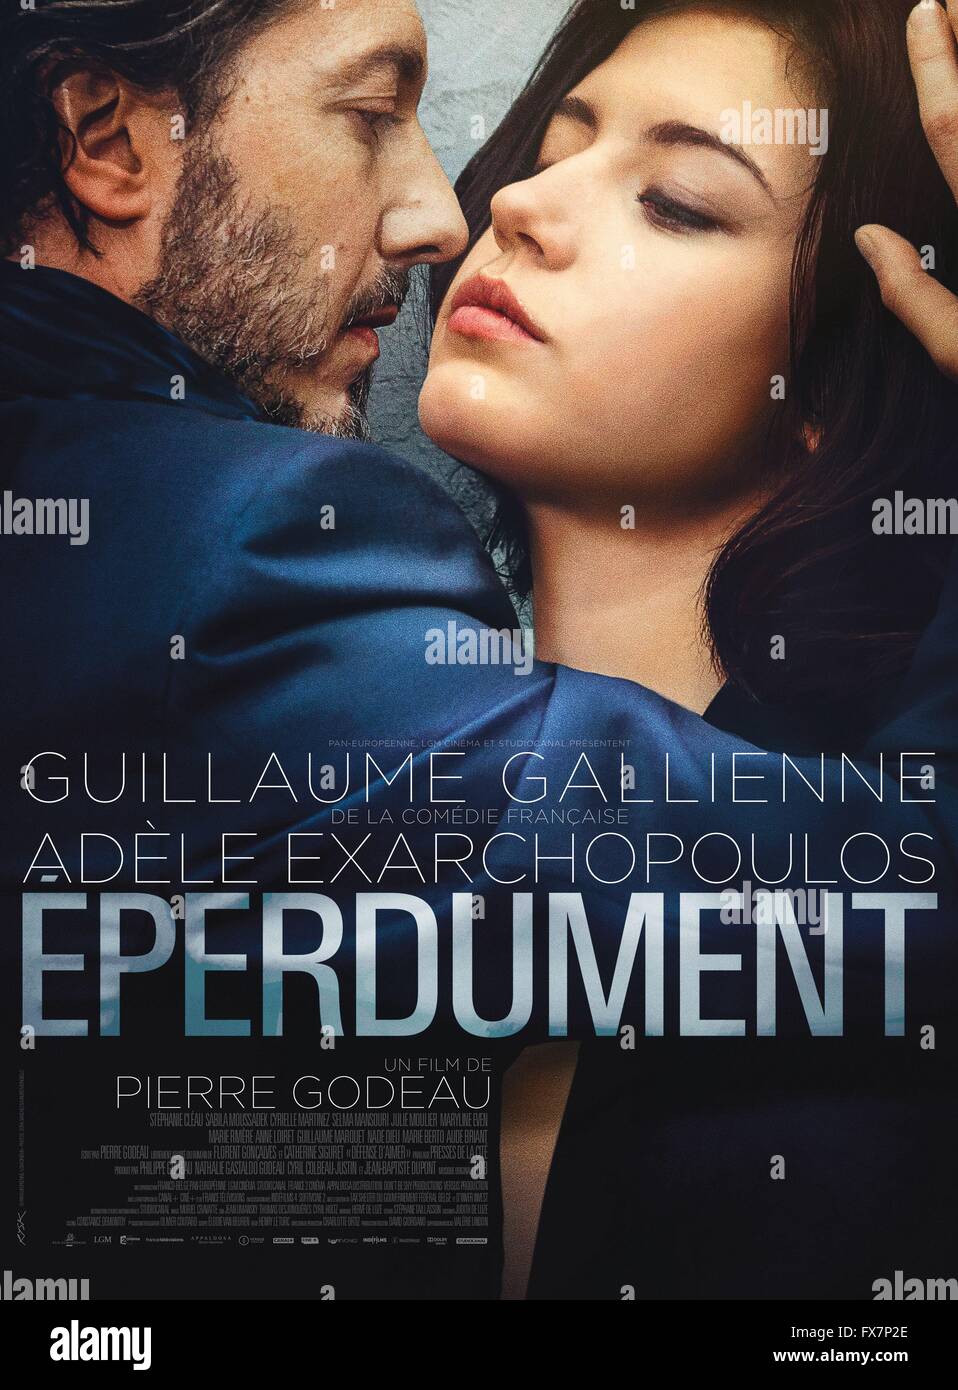 Eperdument Year : 2016 France / Belgium Director : Pierre Godeau Adele Exarchopoulos, Guillaume Gallienne (Fr) Stock Photo